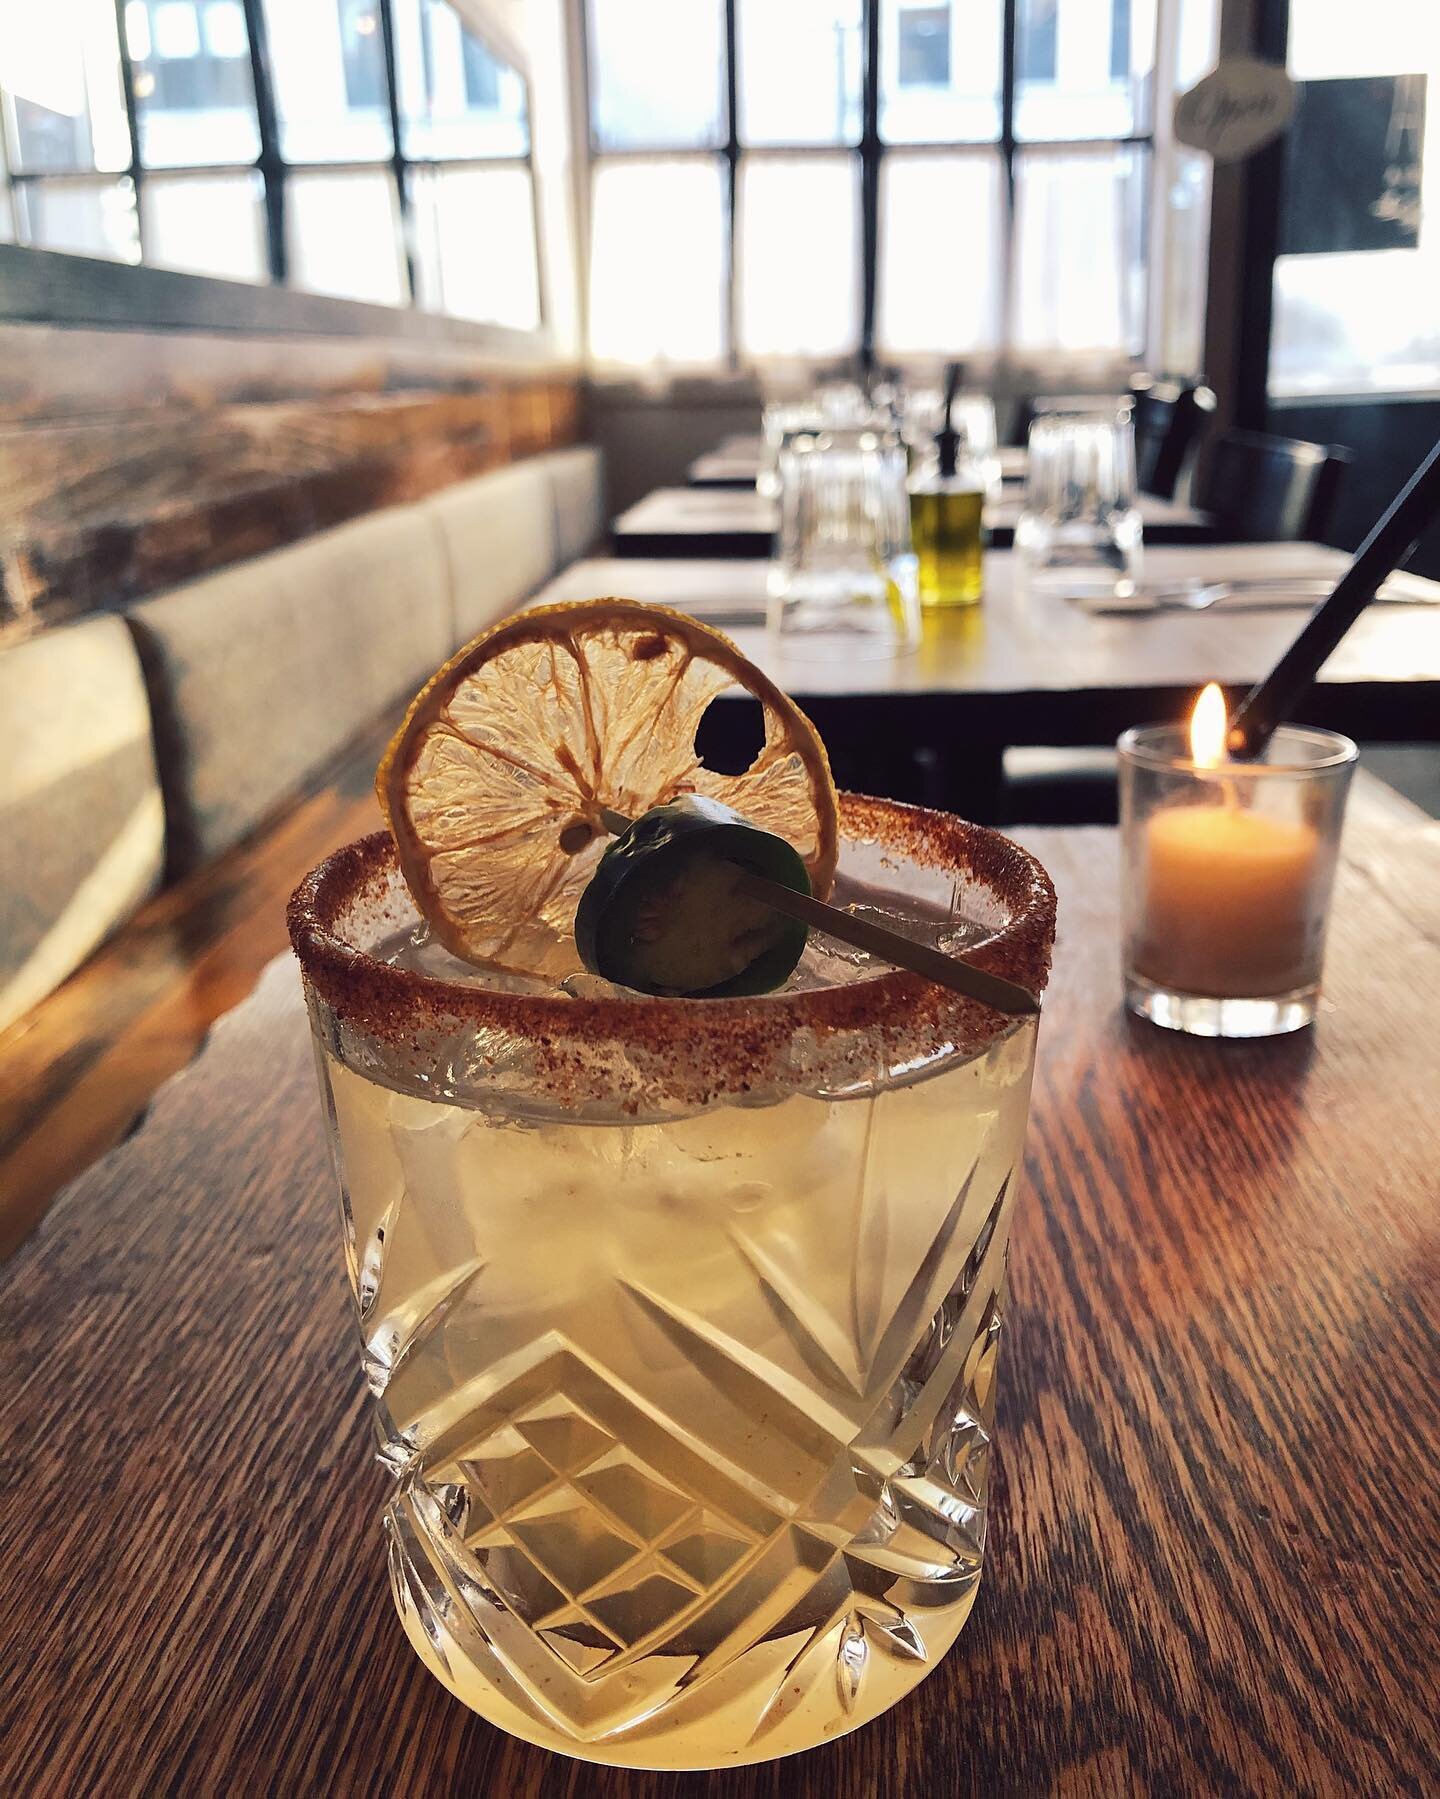 Here at Trattoria we take the saying &ldquo;spice things up&rdquo; seriously! ⠀ ⠀

Oi MARI ~ jalape&ntilde;o infused tequila ~ mezcal ~ sage syrup ~ lime~ sherry ⠀ ⠀ ⠀ ⠀ ⠀
🌶 ⠀#signaturedrinks #cocktails #tuesdayvibes